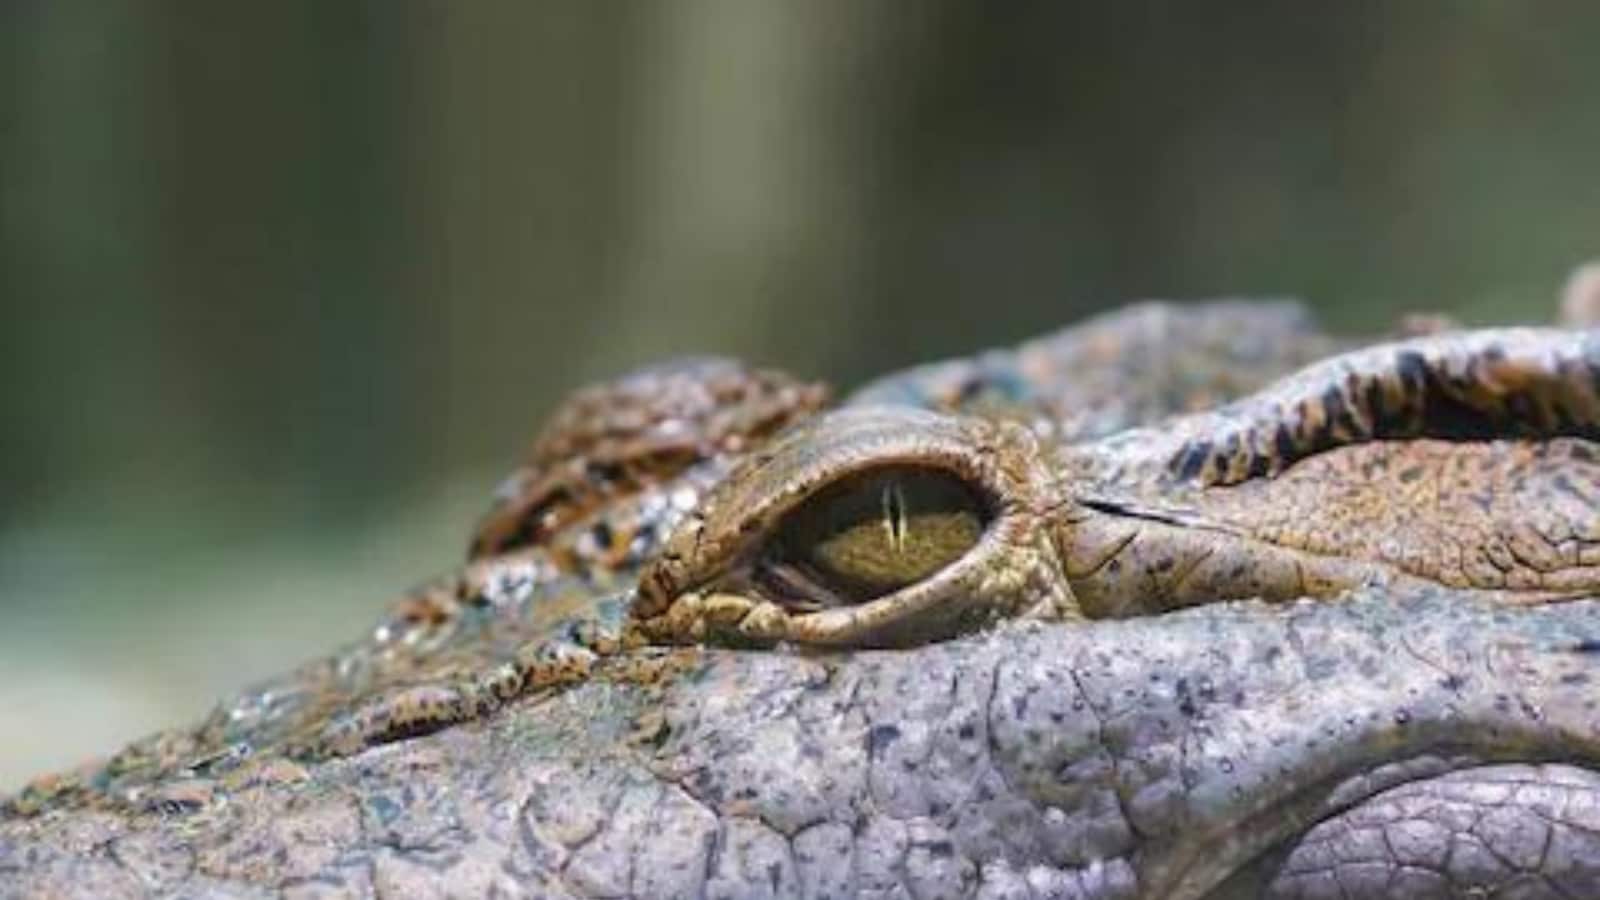 Crocodile tears' are surprisingly similar to our own